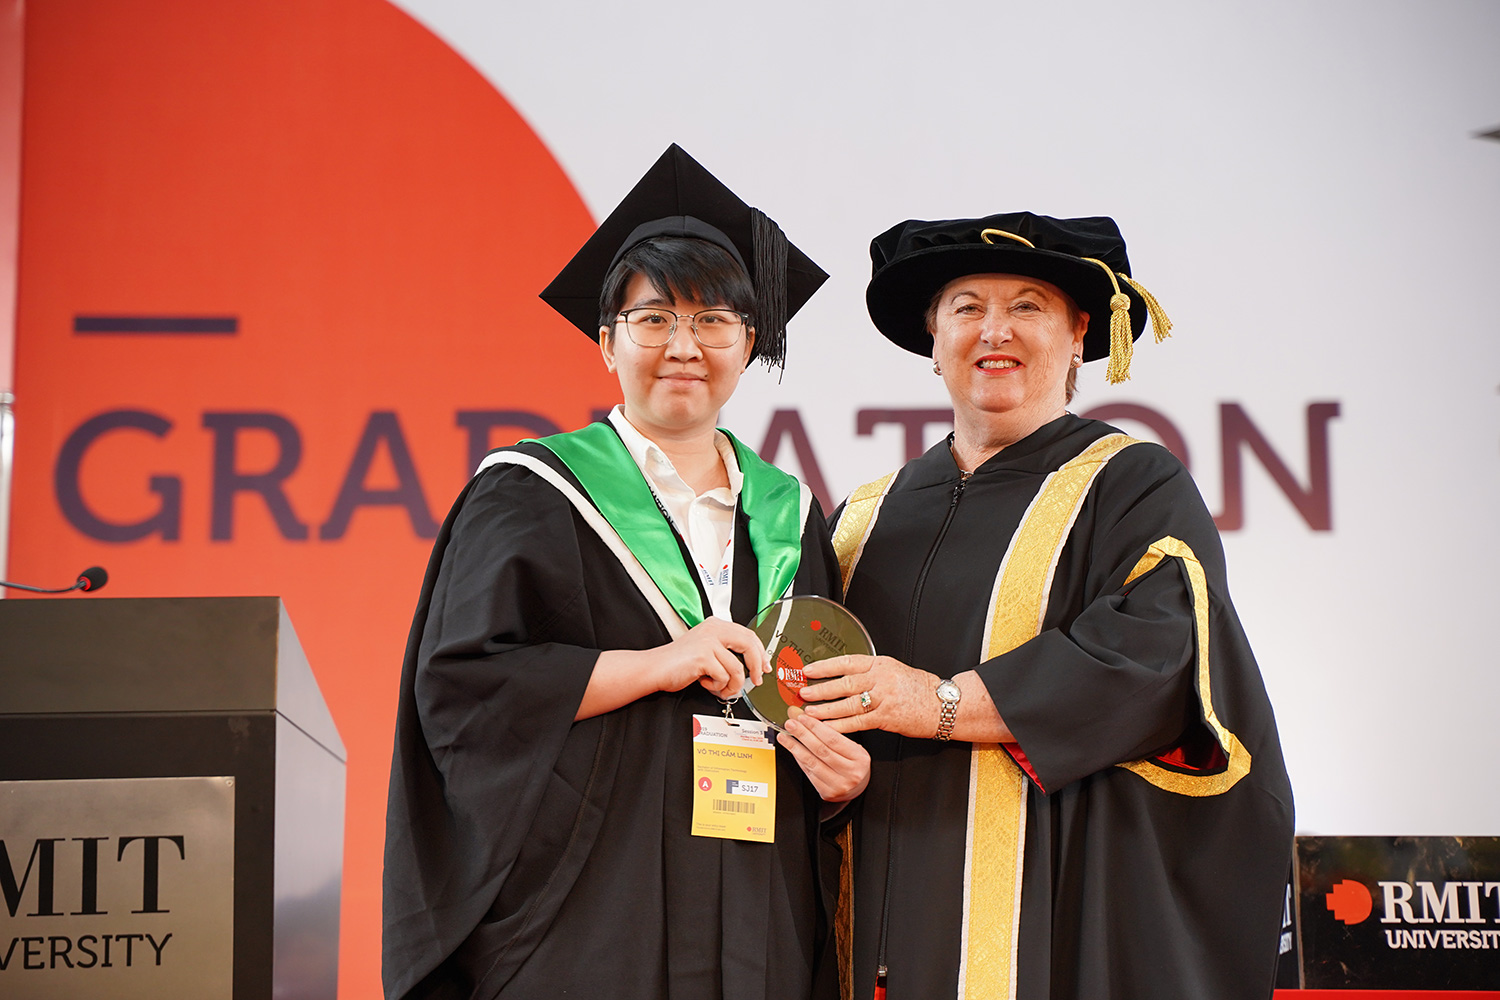 Vo Thi Cam Linh, the only female RMIT Bachelor of Information Technology graduate, was presented with the Outstanding Graduate Award for achieving the highest GPA in her graduating program. 